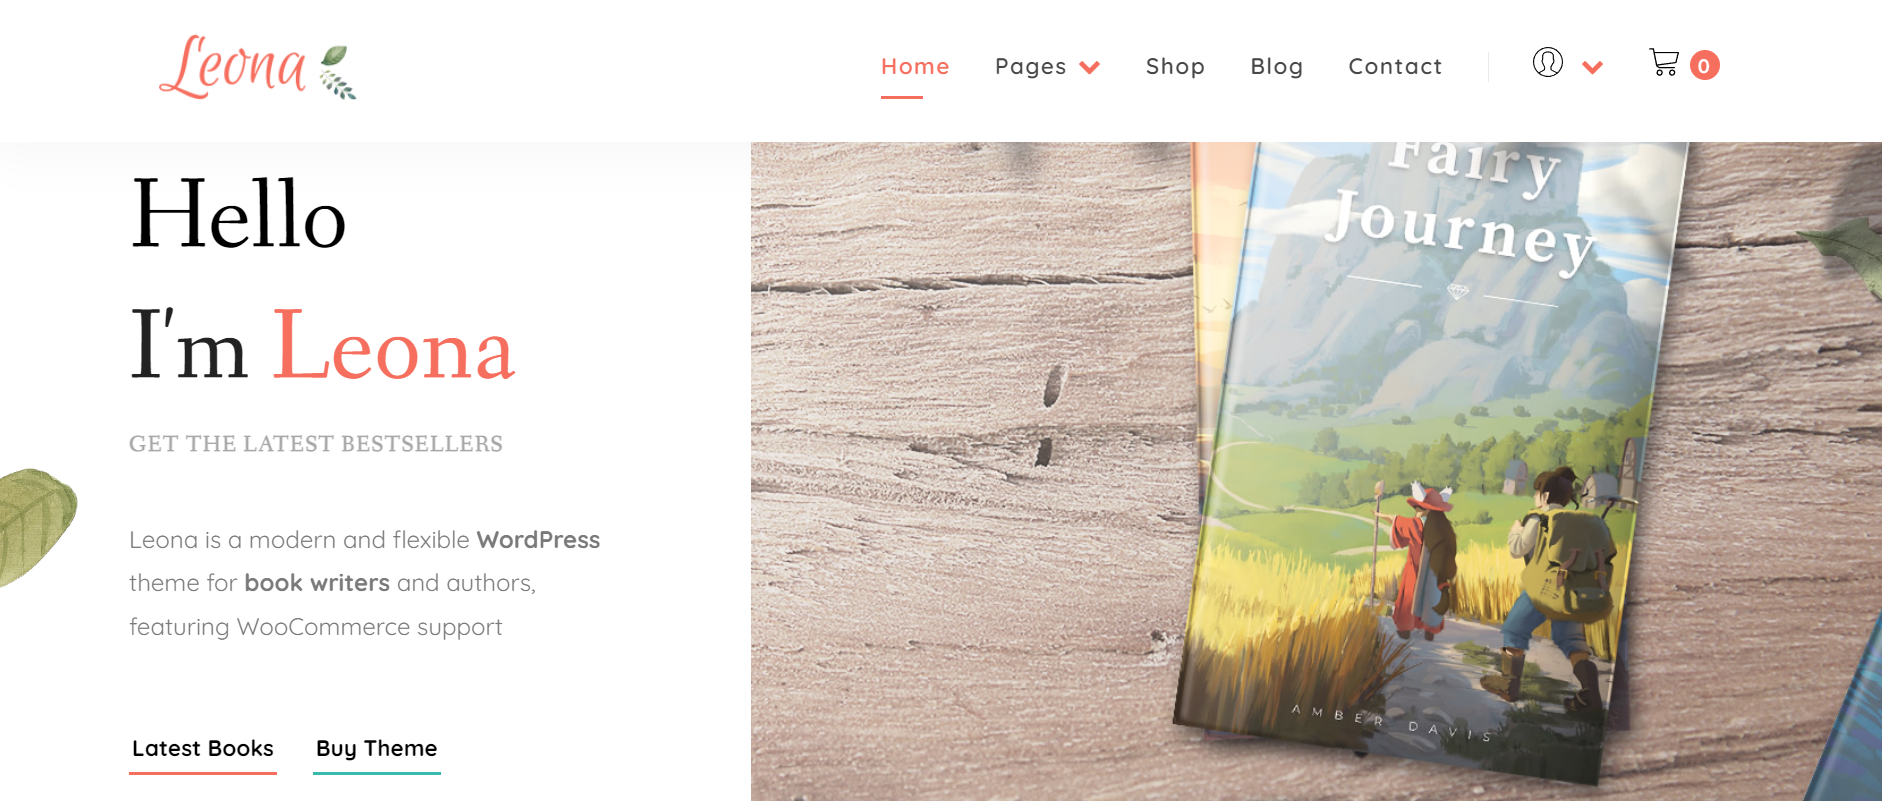 Leona - Best WordPress Themes for Writers and Authors